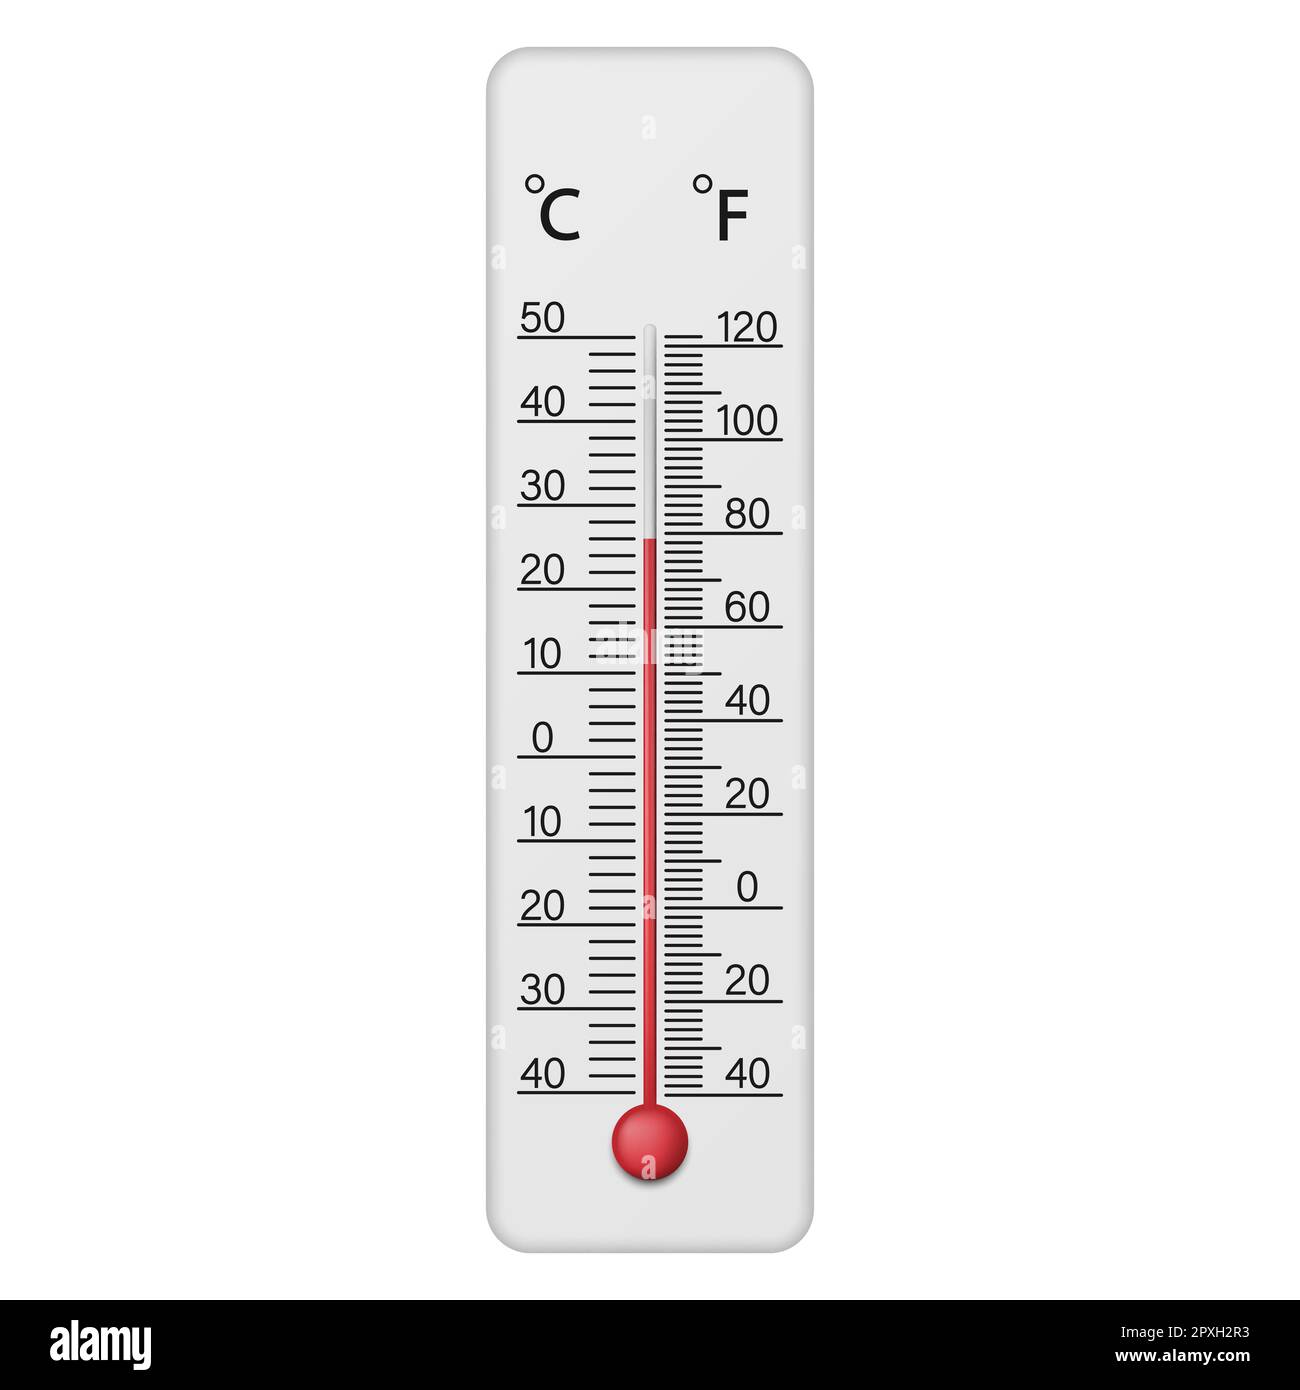 https://c8.alamy.com/comp/2PXH2R3/meteorological-thermometer-fahrenheit-and-celsius-for-measuring-air-temperature-vector-illustration-eps-10-2PXH2R3.jpg